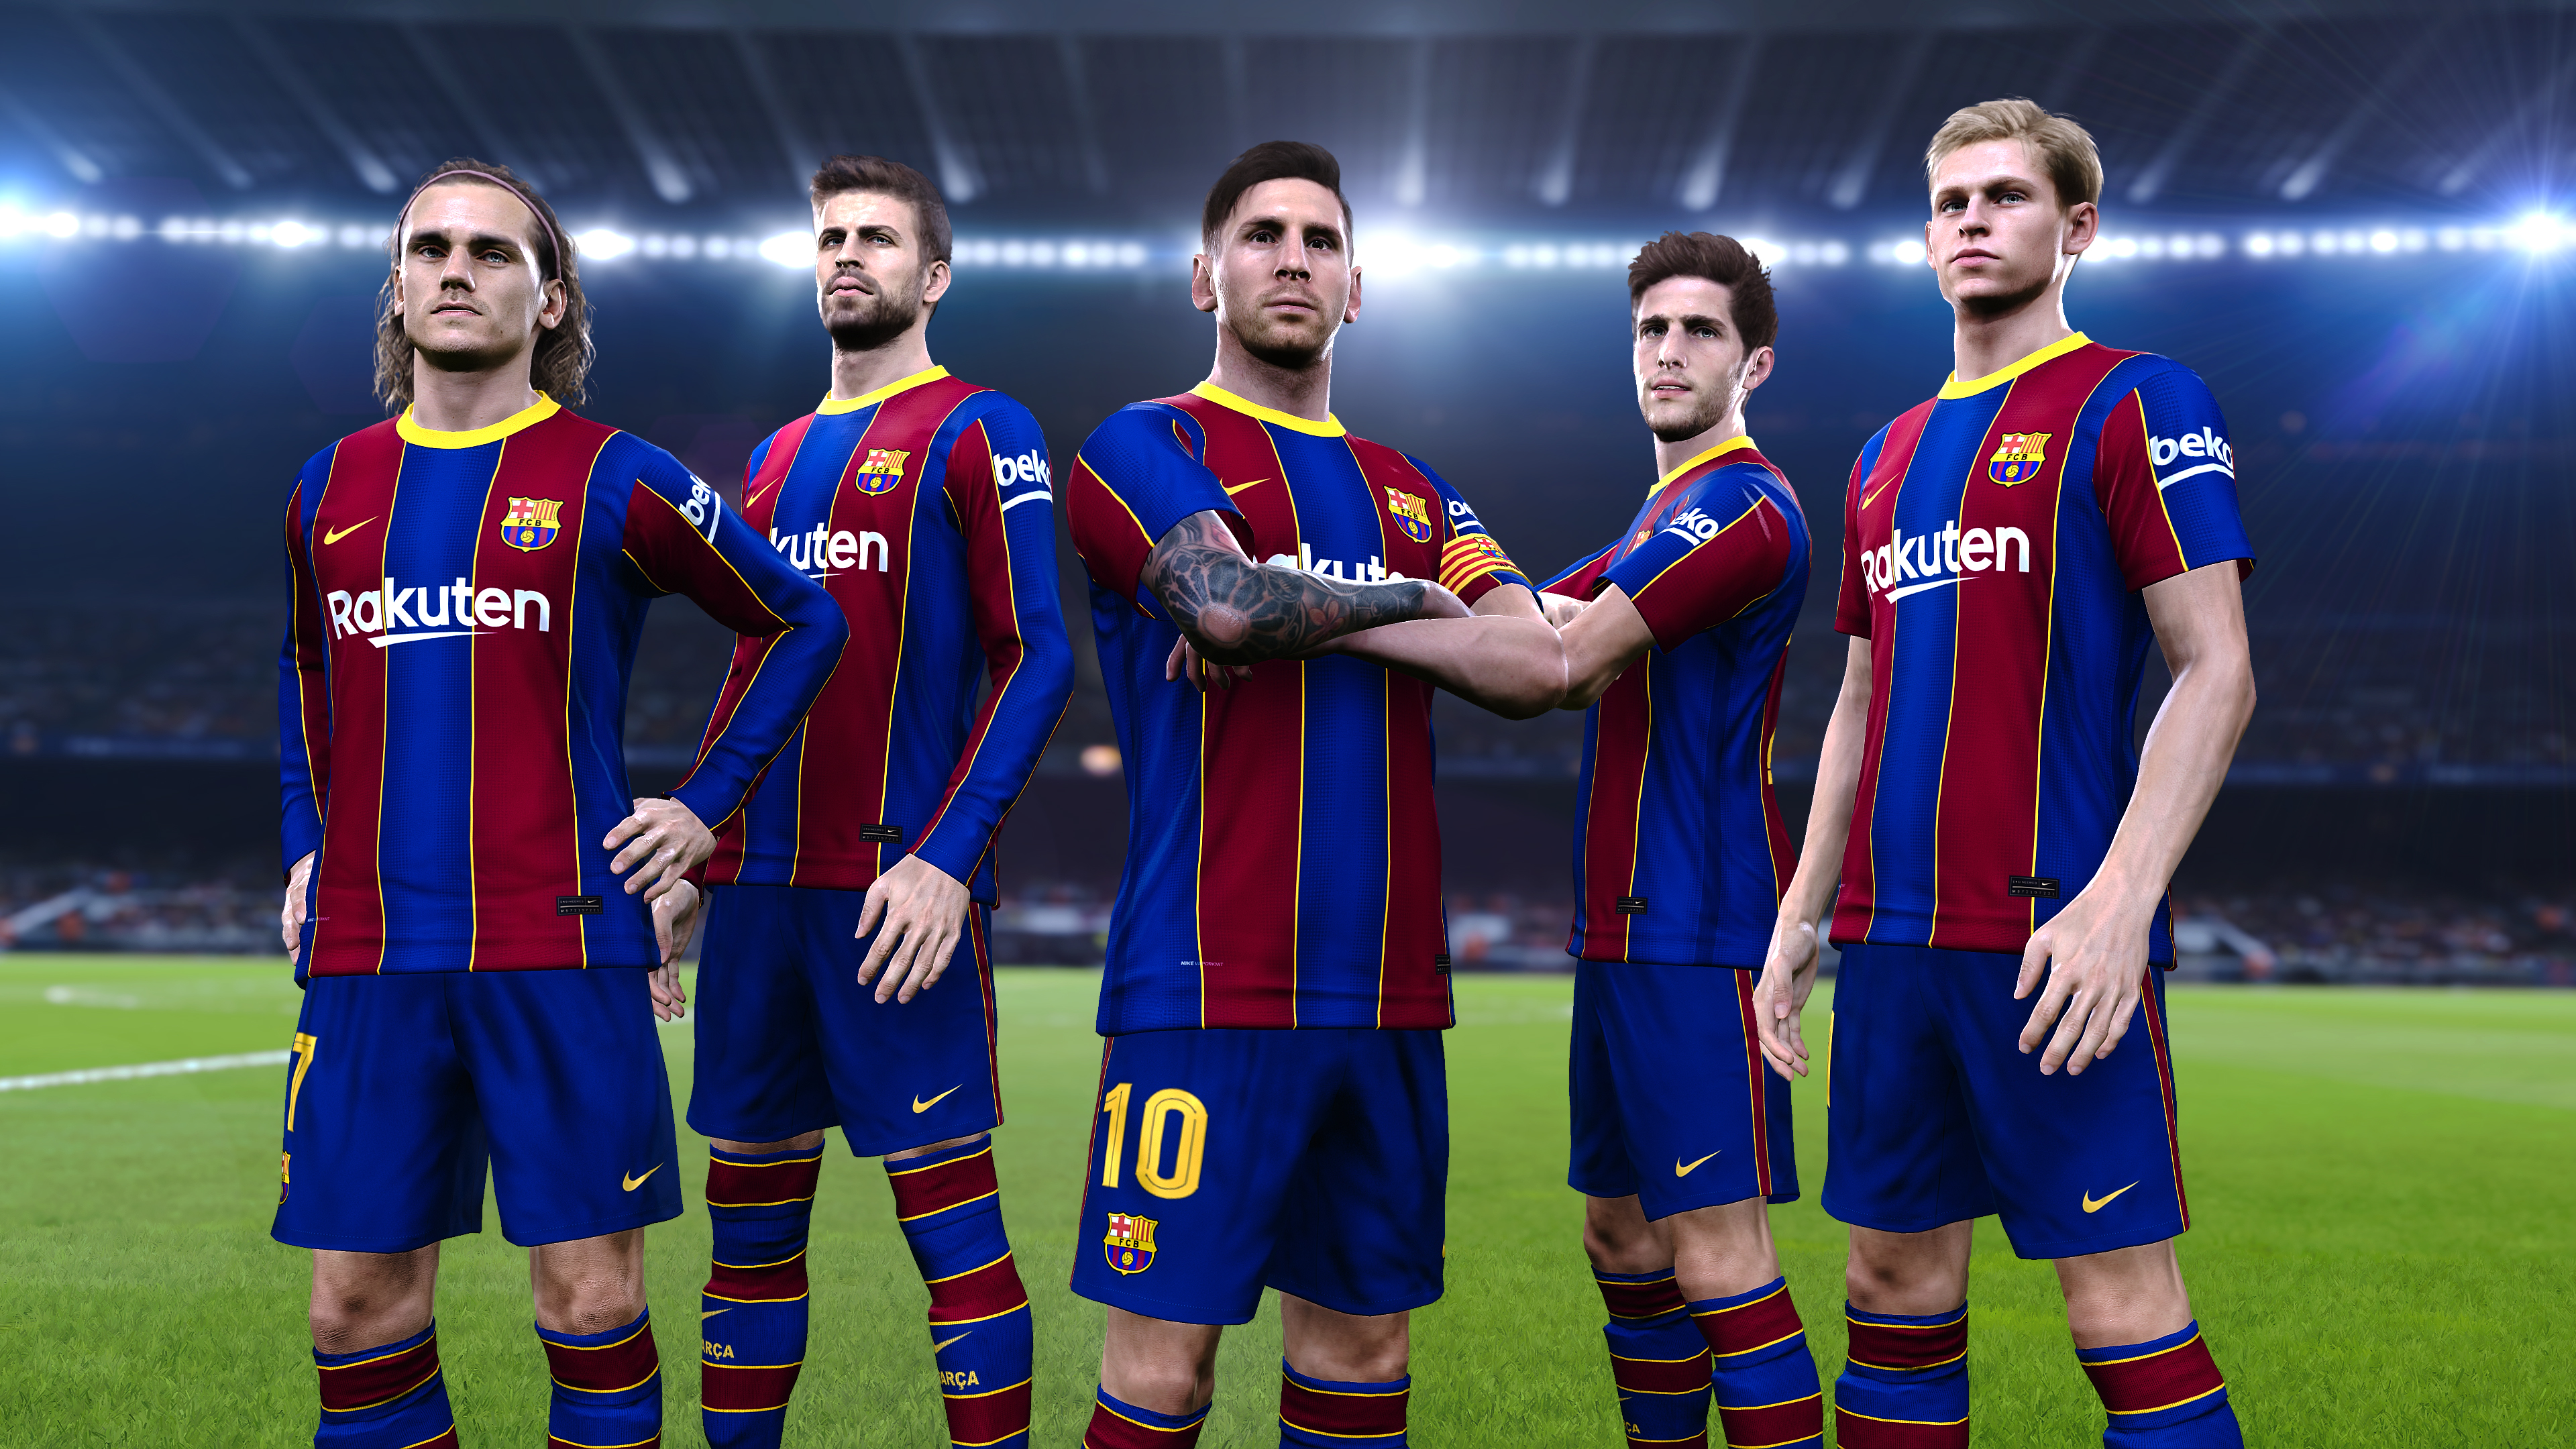 Efootball Pes 2021 Season Update Fc Barcelona Edition For Ps4 Buy Cheaper In Official Store Psprices Usa